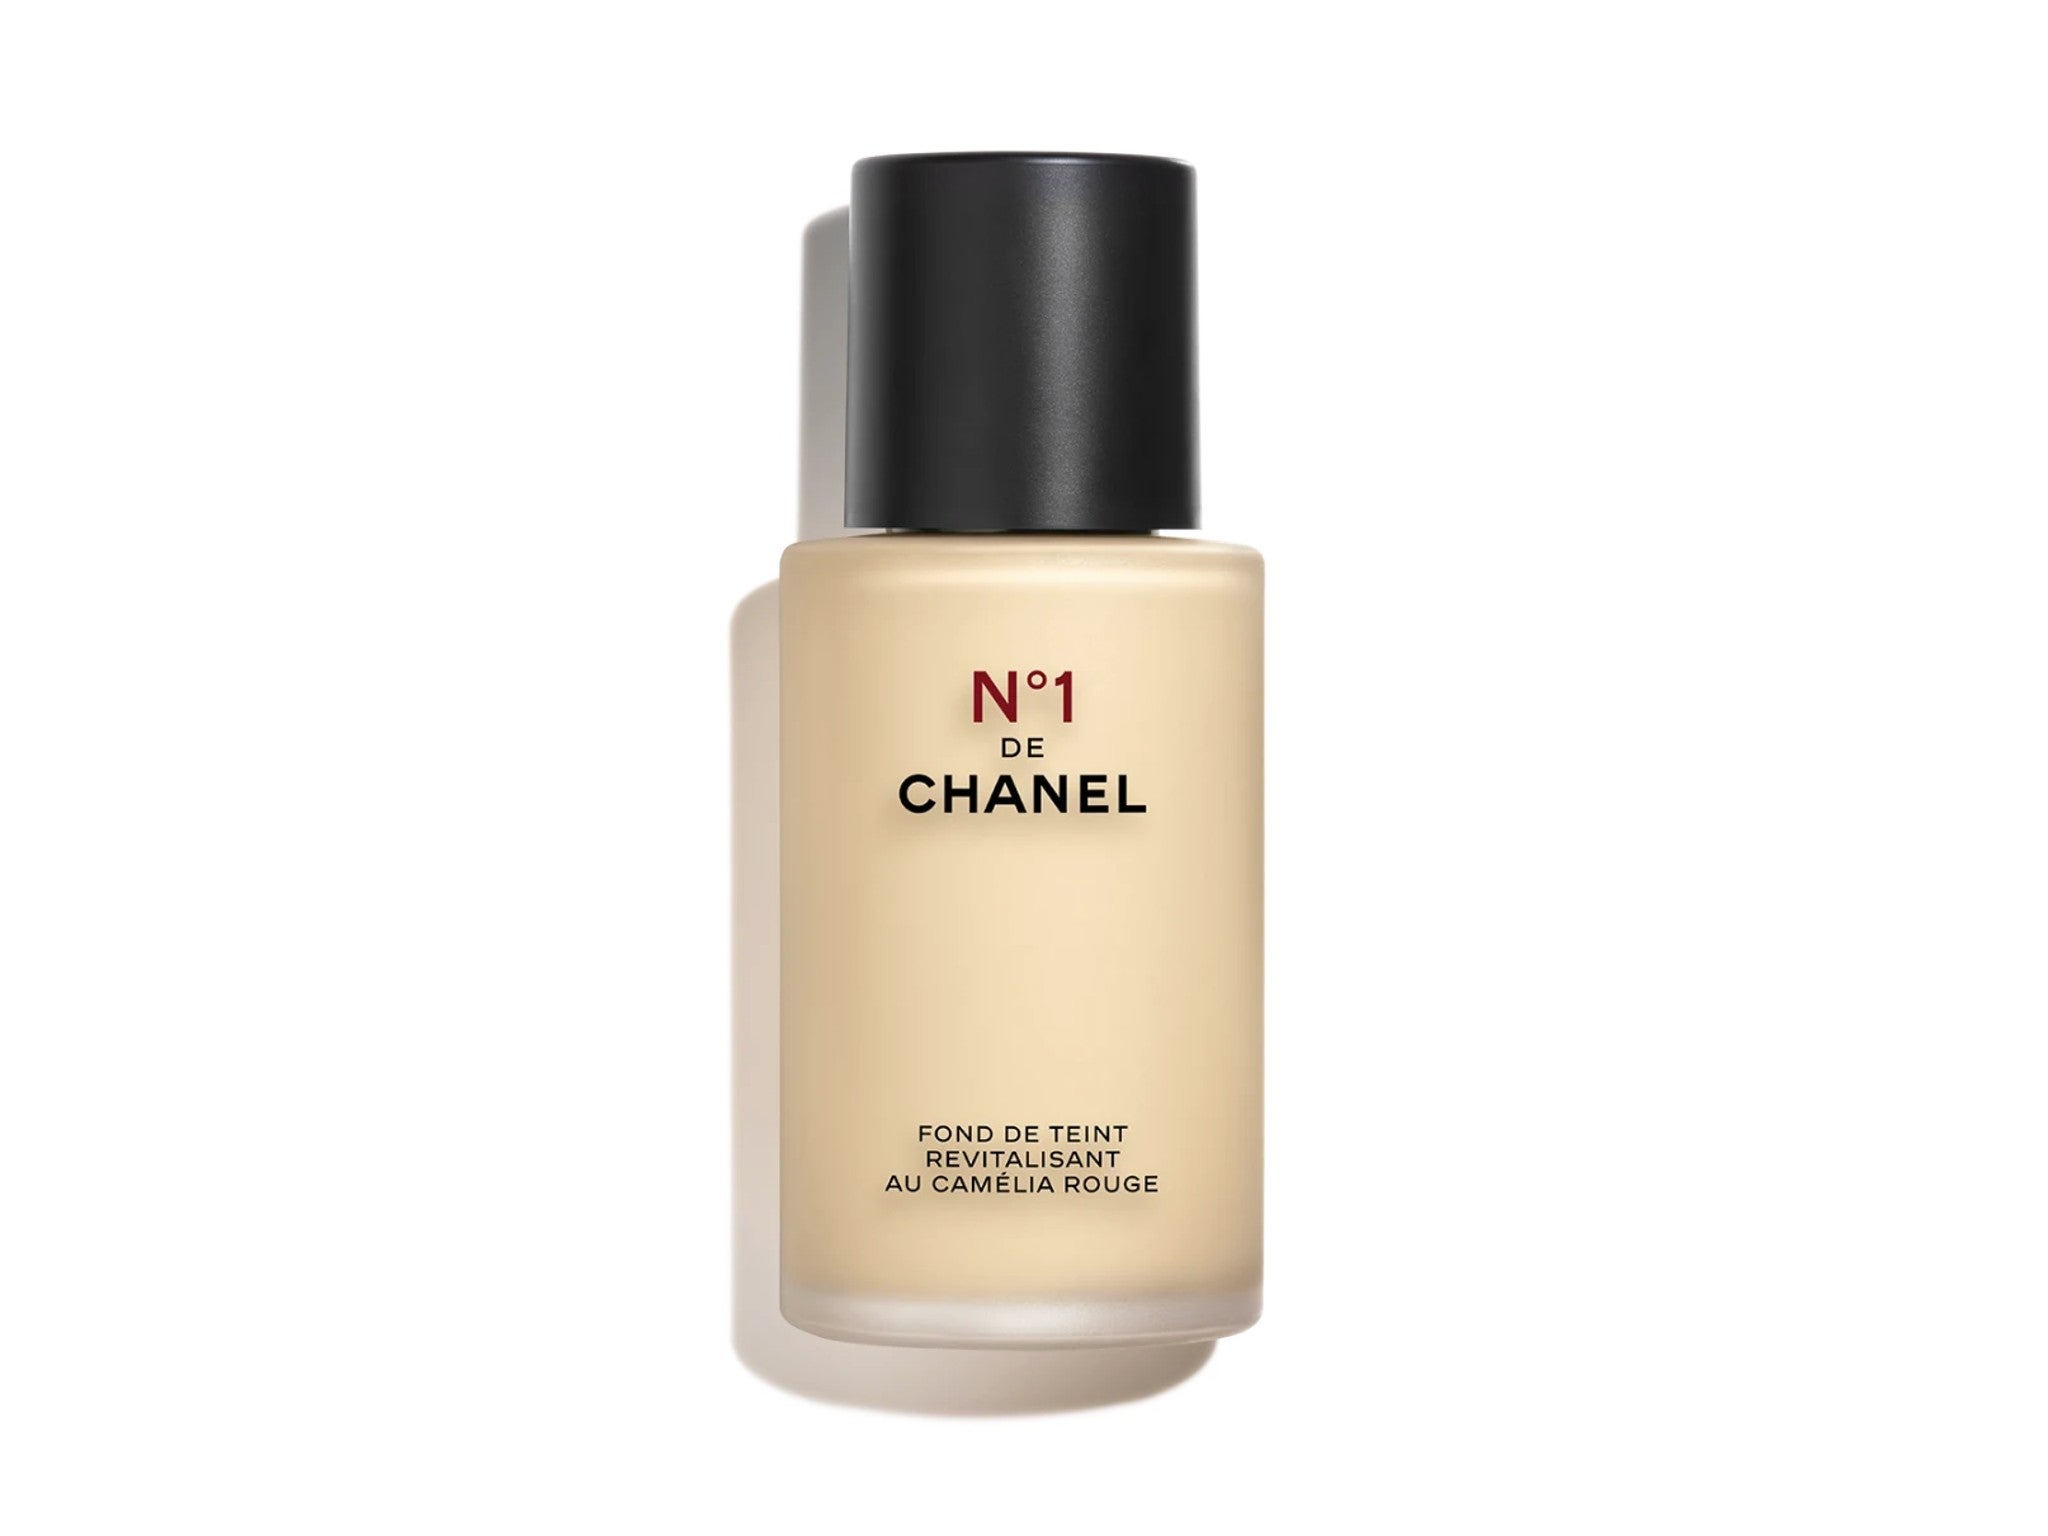 Chanel N°1 red camellia revitalising foundation indybest.jpg